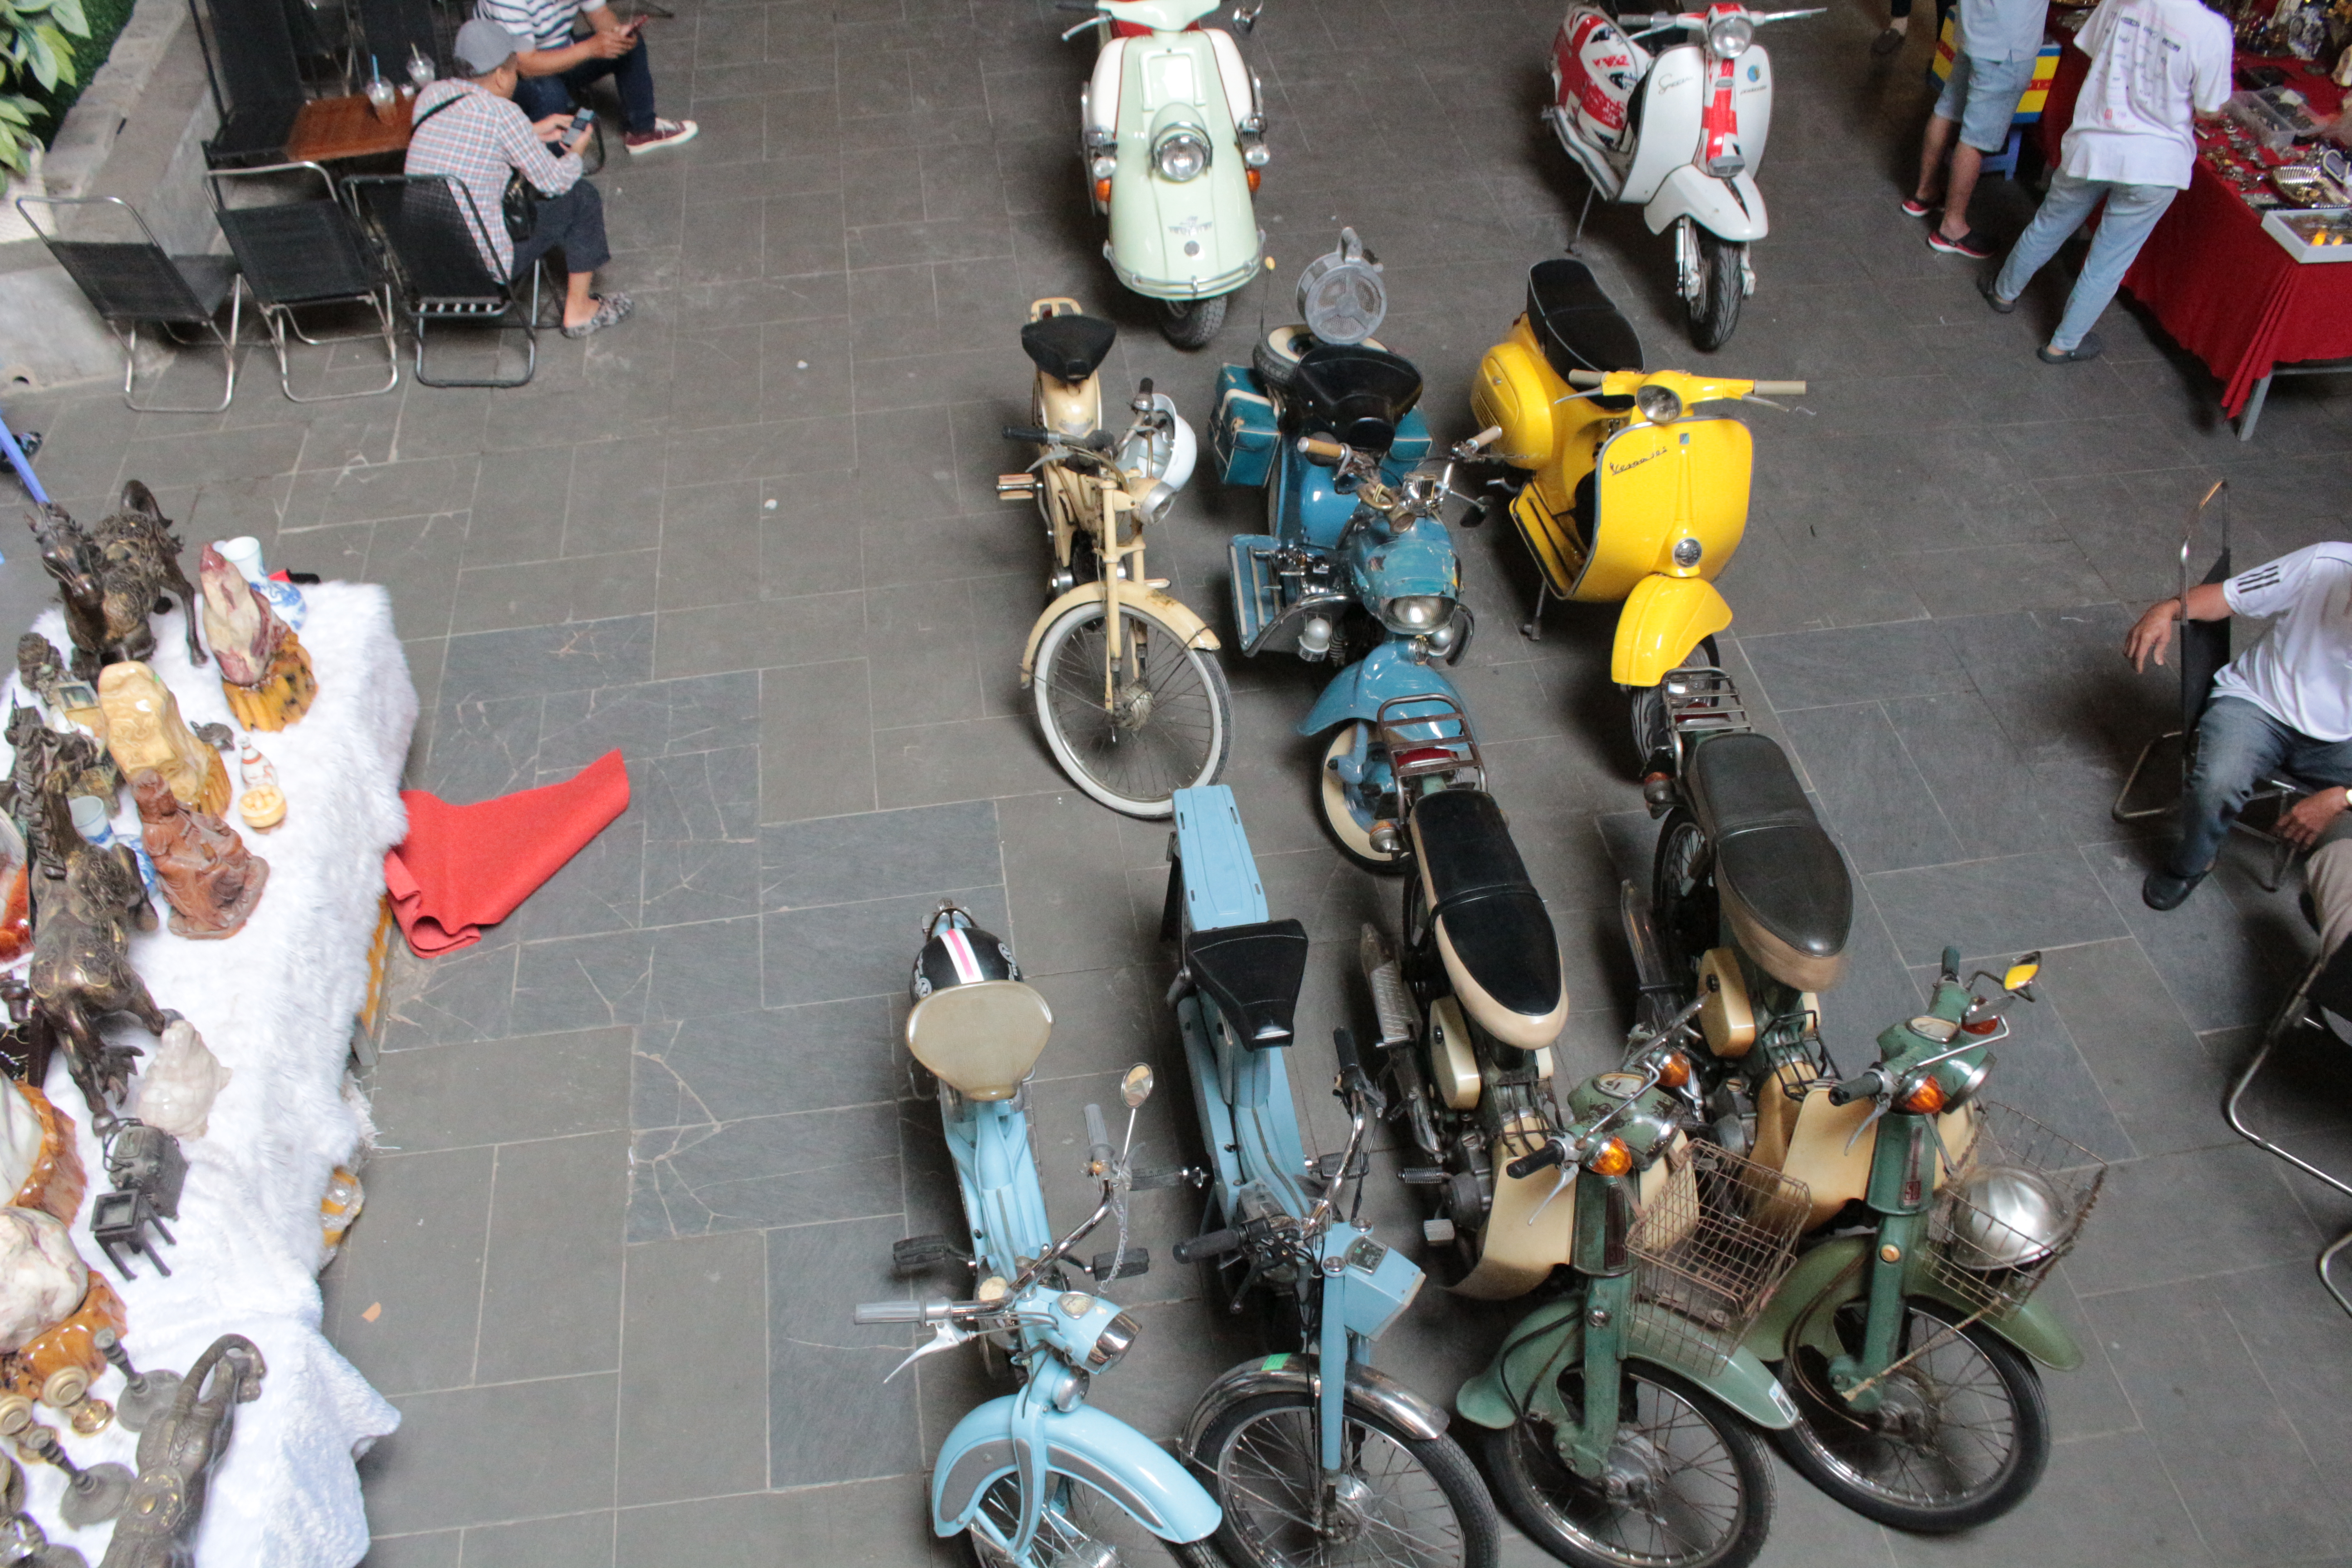 Old motorbikes are displayed at Cafe Chợ Đồ Cổ in Binh Thanh District, Ho Chi Minh City. Photo: Ray Kuschert